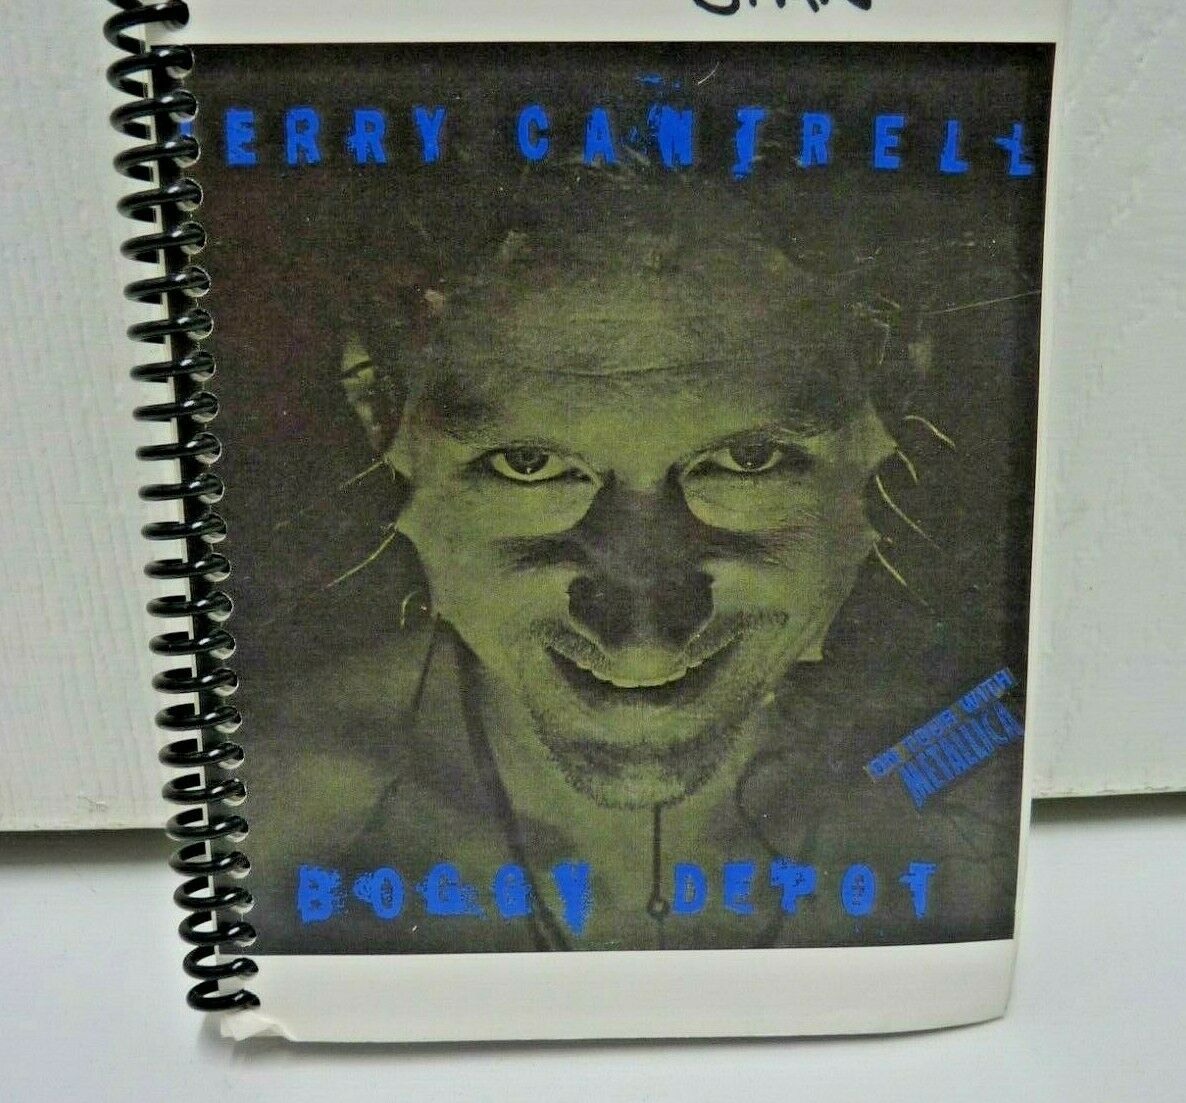 Vintage Jerry Cantrell Boggy Depot 1998 Tour Itinerary 2nd Leg Metallica Pocket2 Autograph Collectible Memorabilia 233127674202 